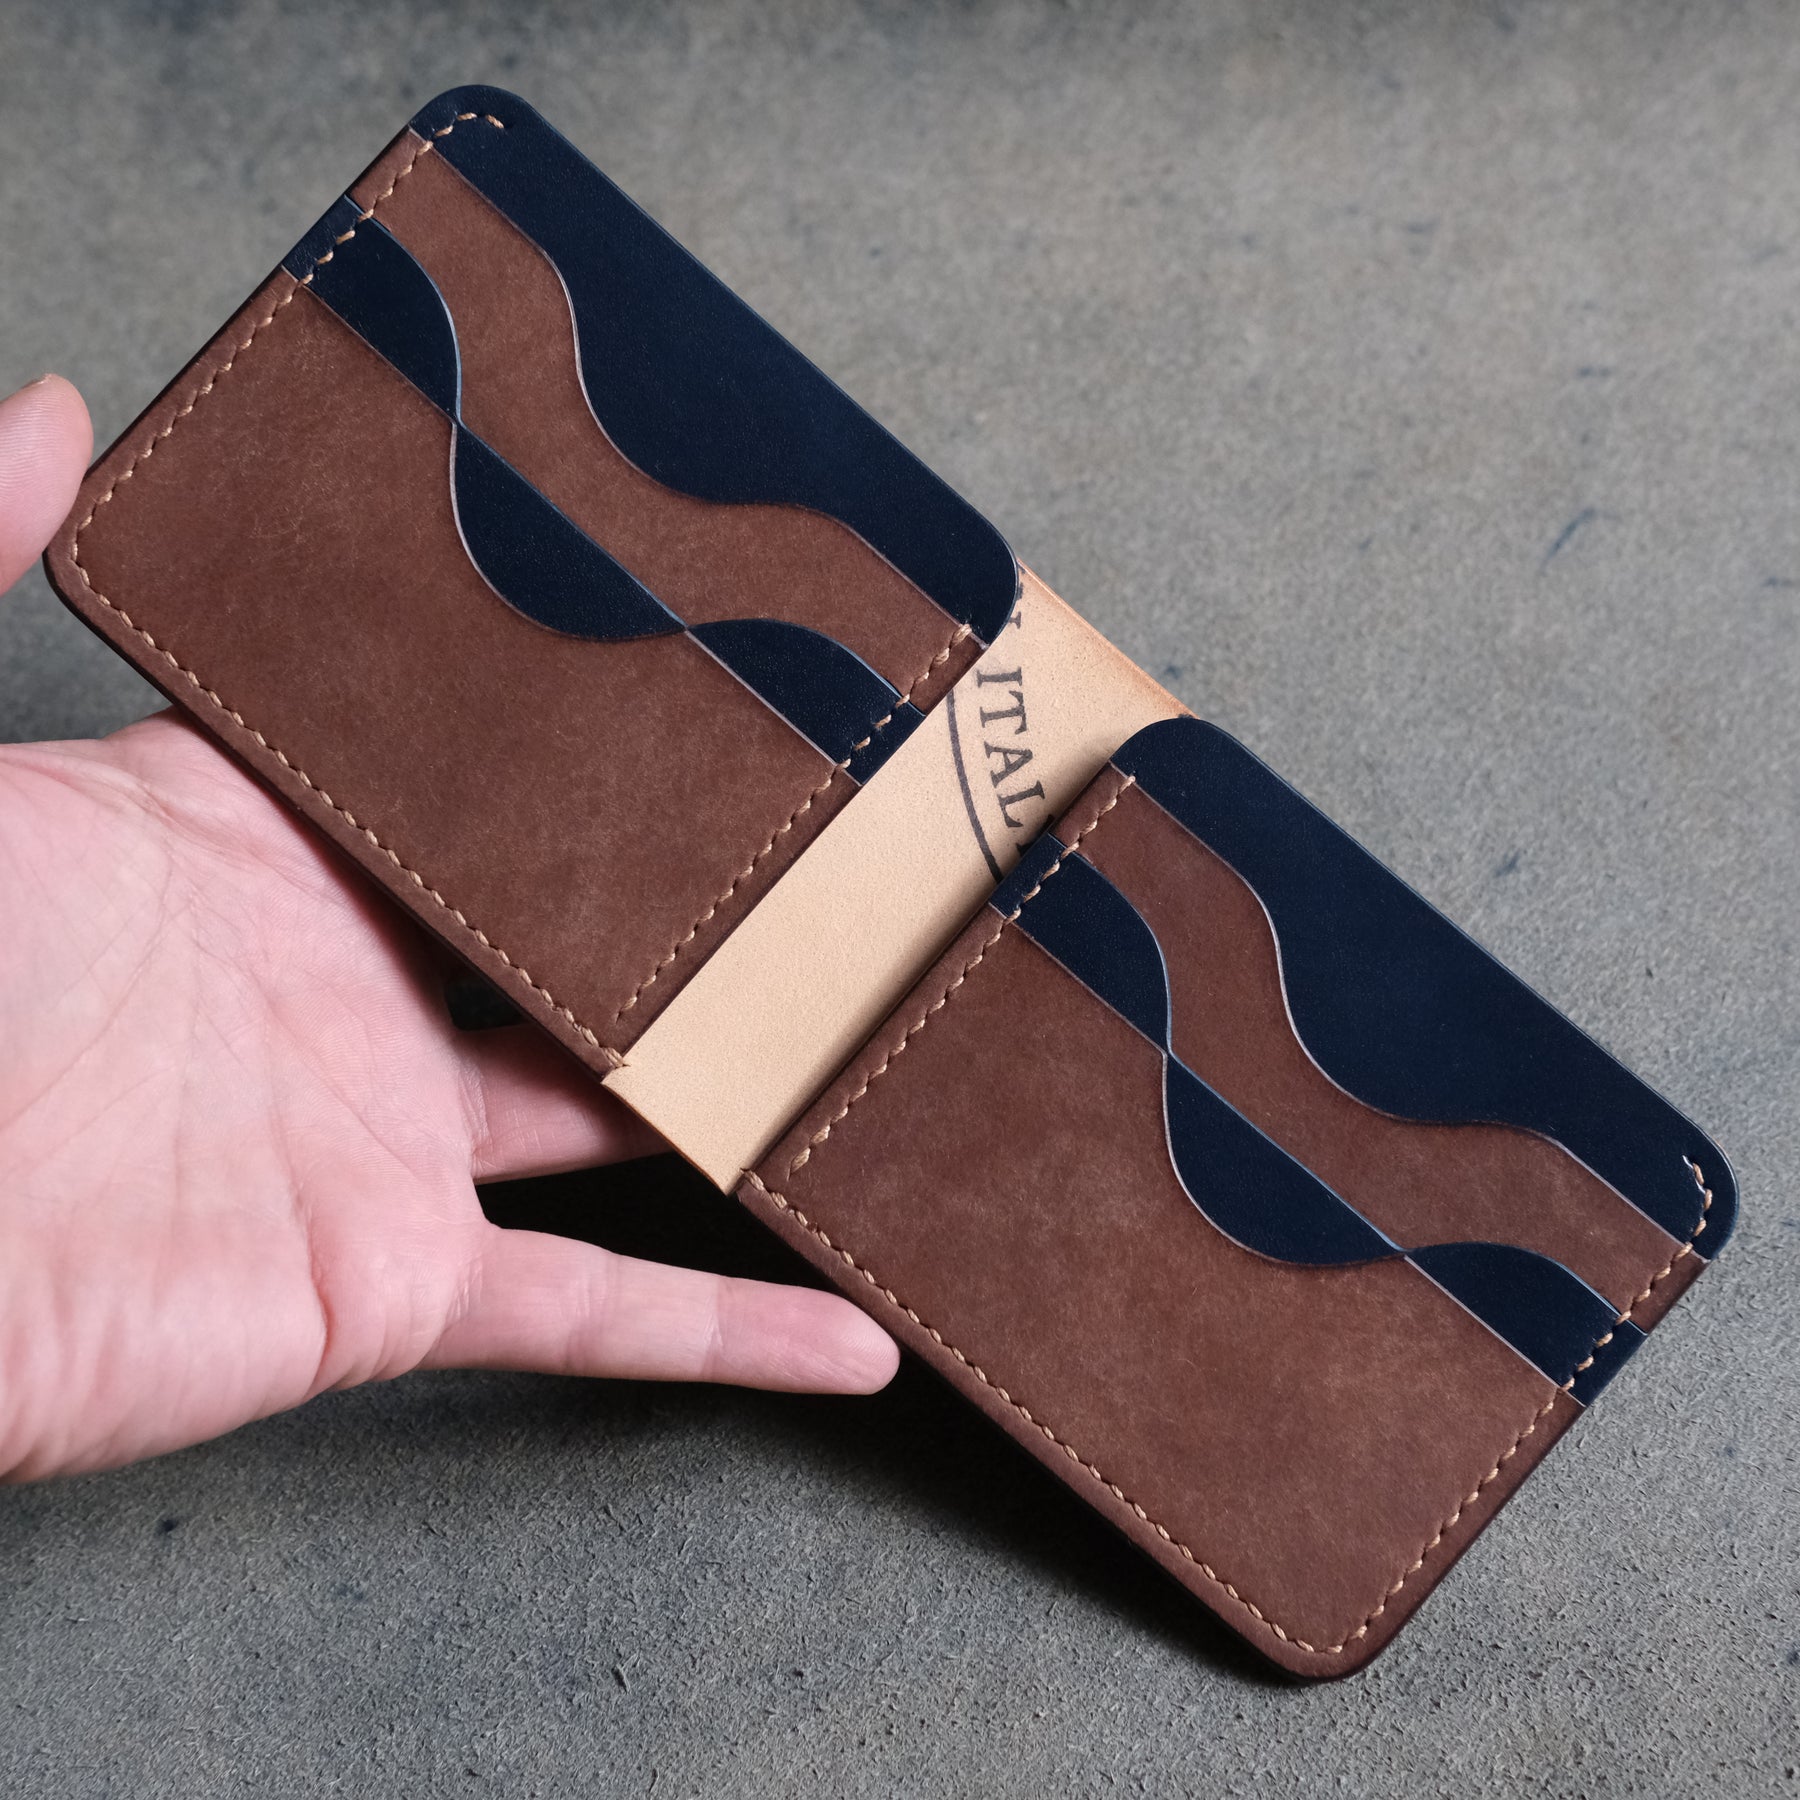 Rocky Mountain Leather Supply DS-021 The Eddy Leather Wallet